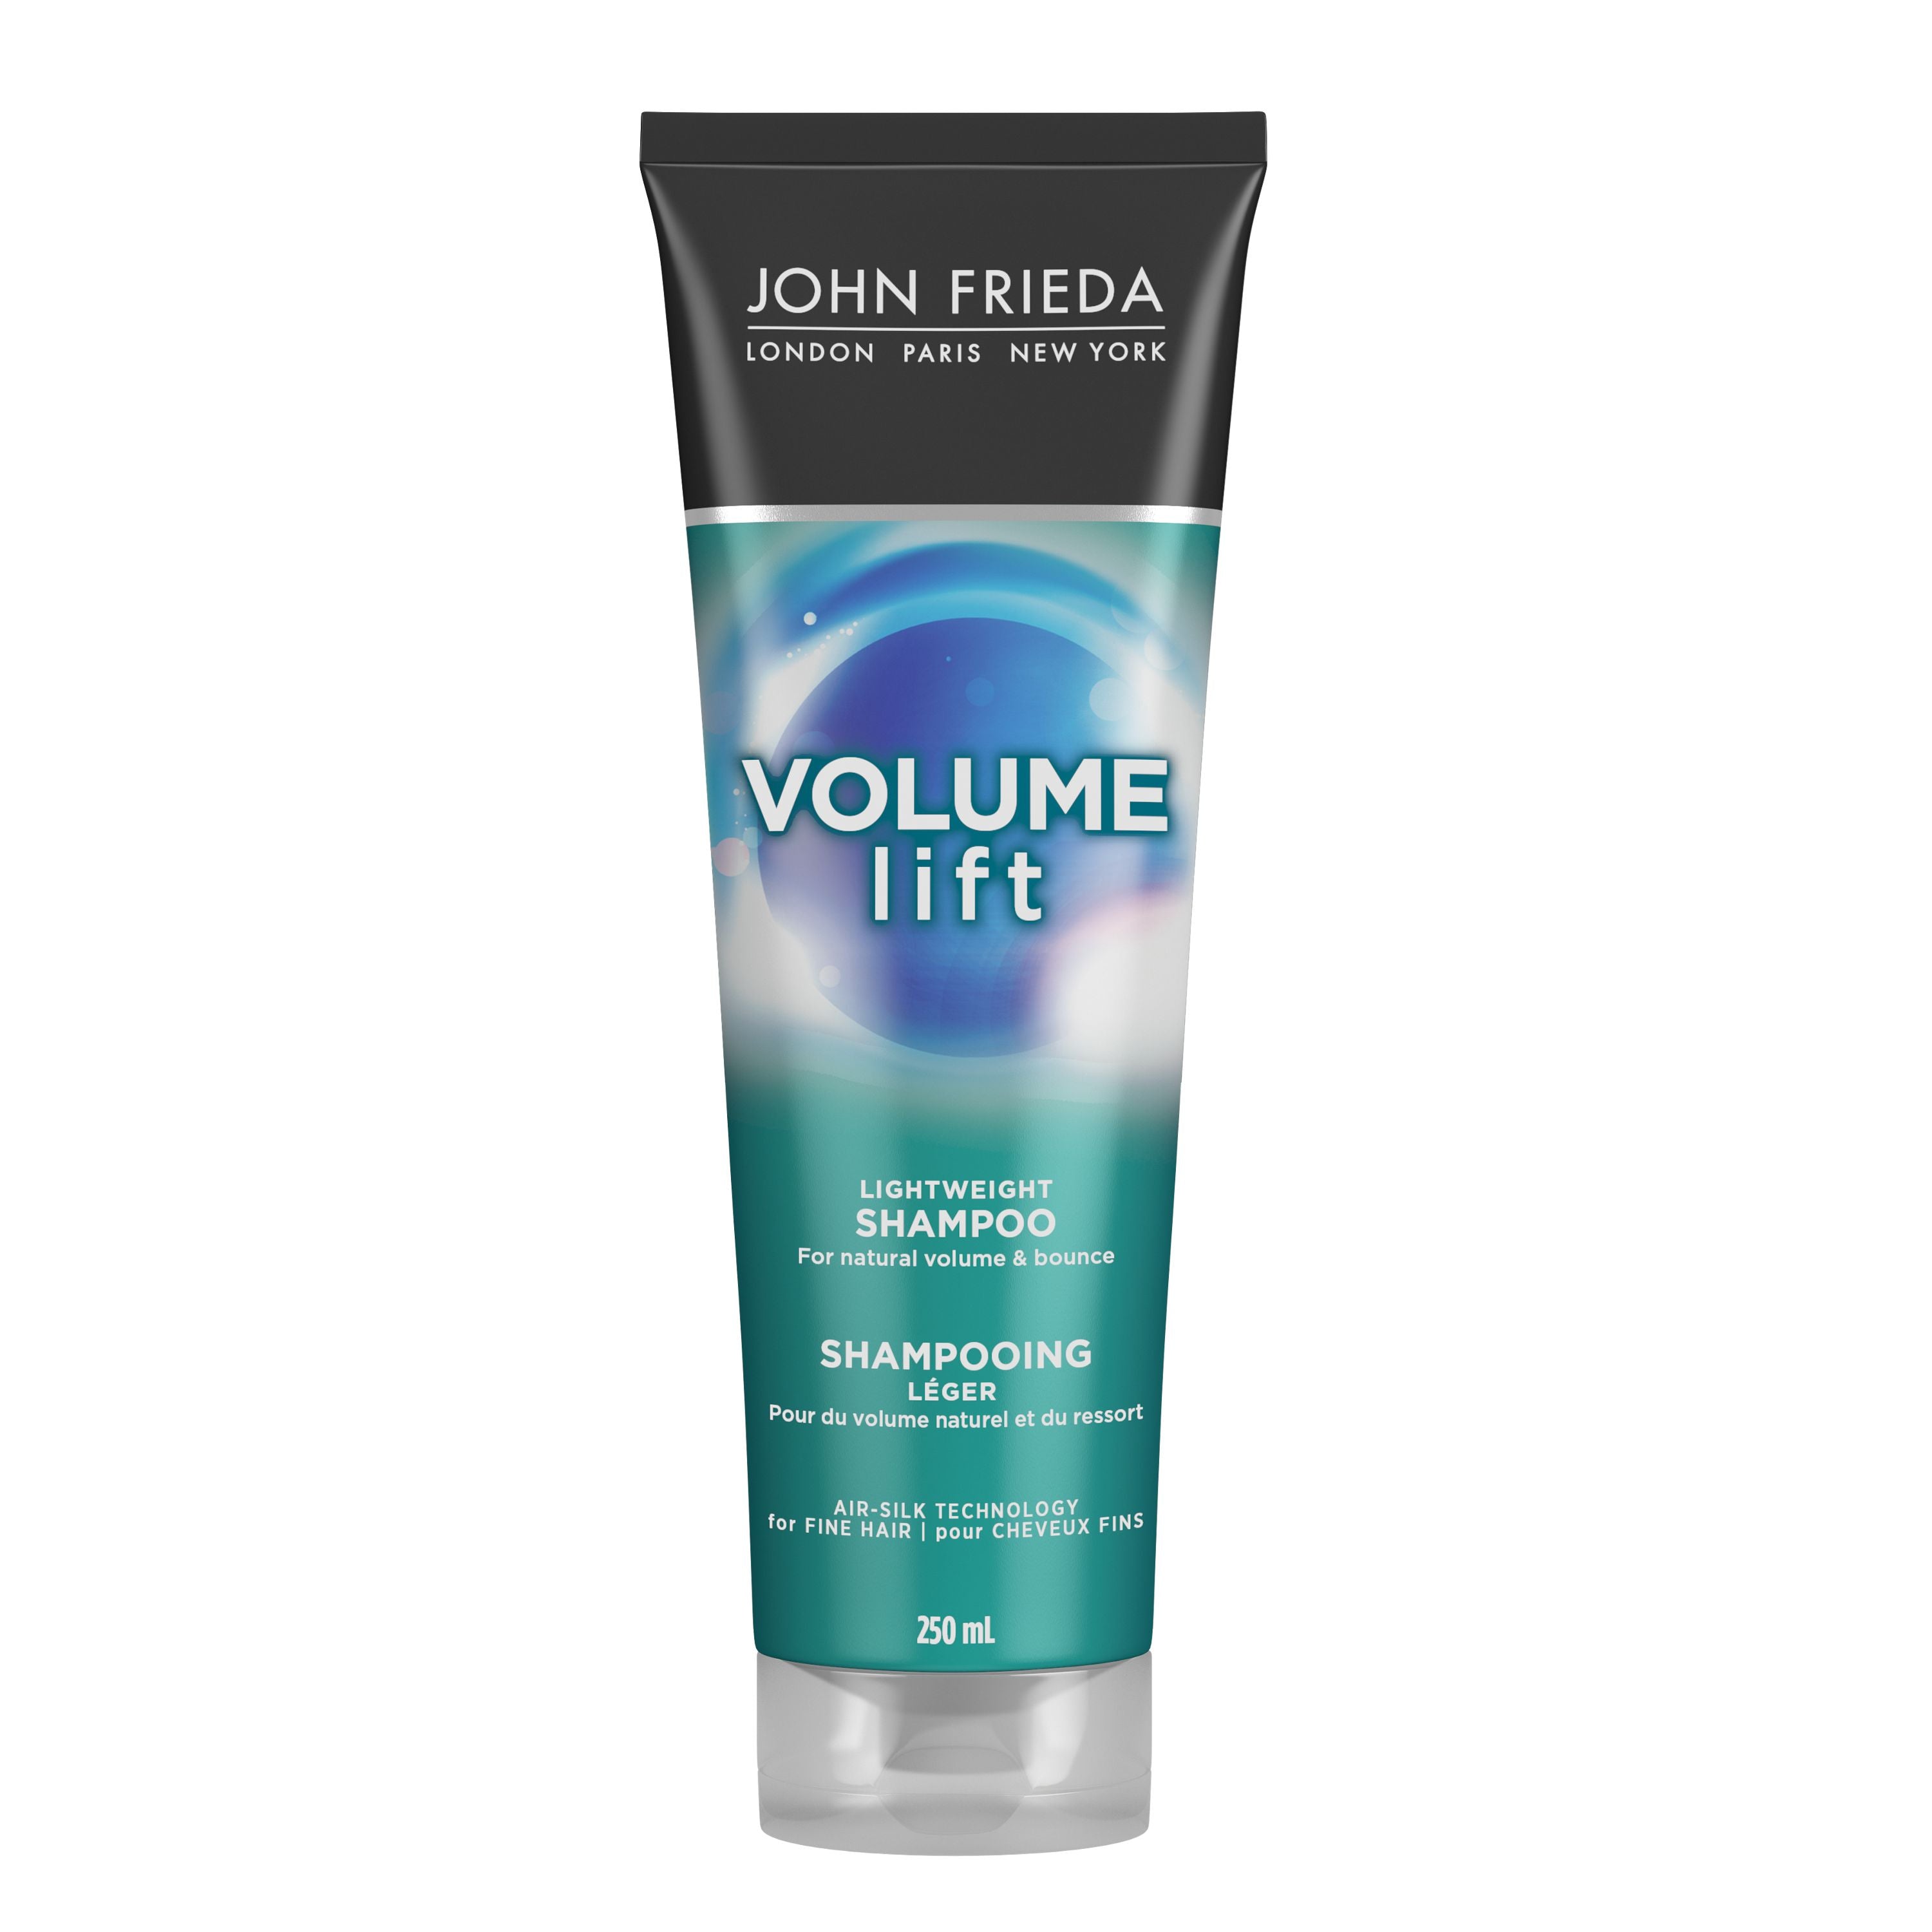 English: Volume Lift Lightweight Shampoo product image. The packaging is a squeeze bottle. Français: Image du produit Shampooing léger Volume Lift. L’emballage est une bouteille à presser.